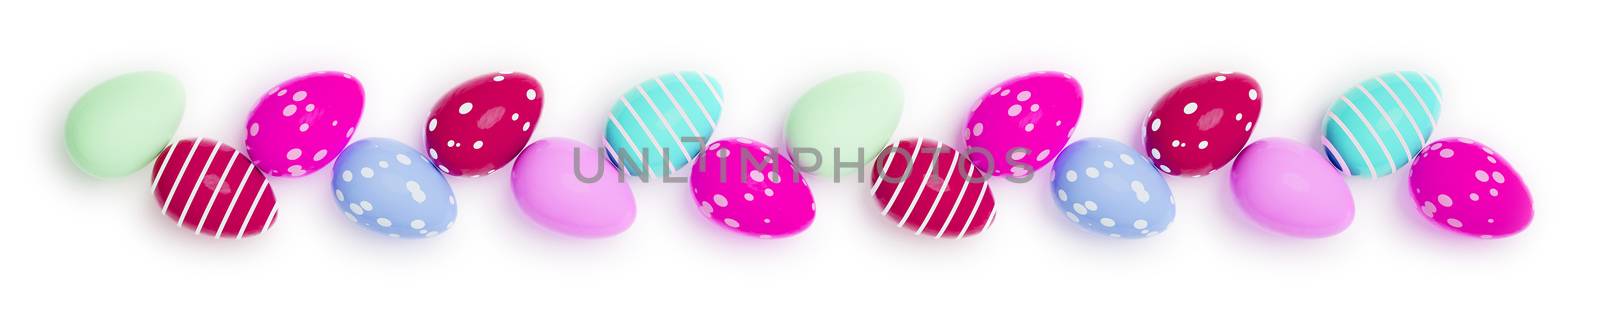 a row of colored easter eggs by magann